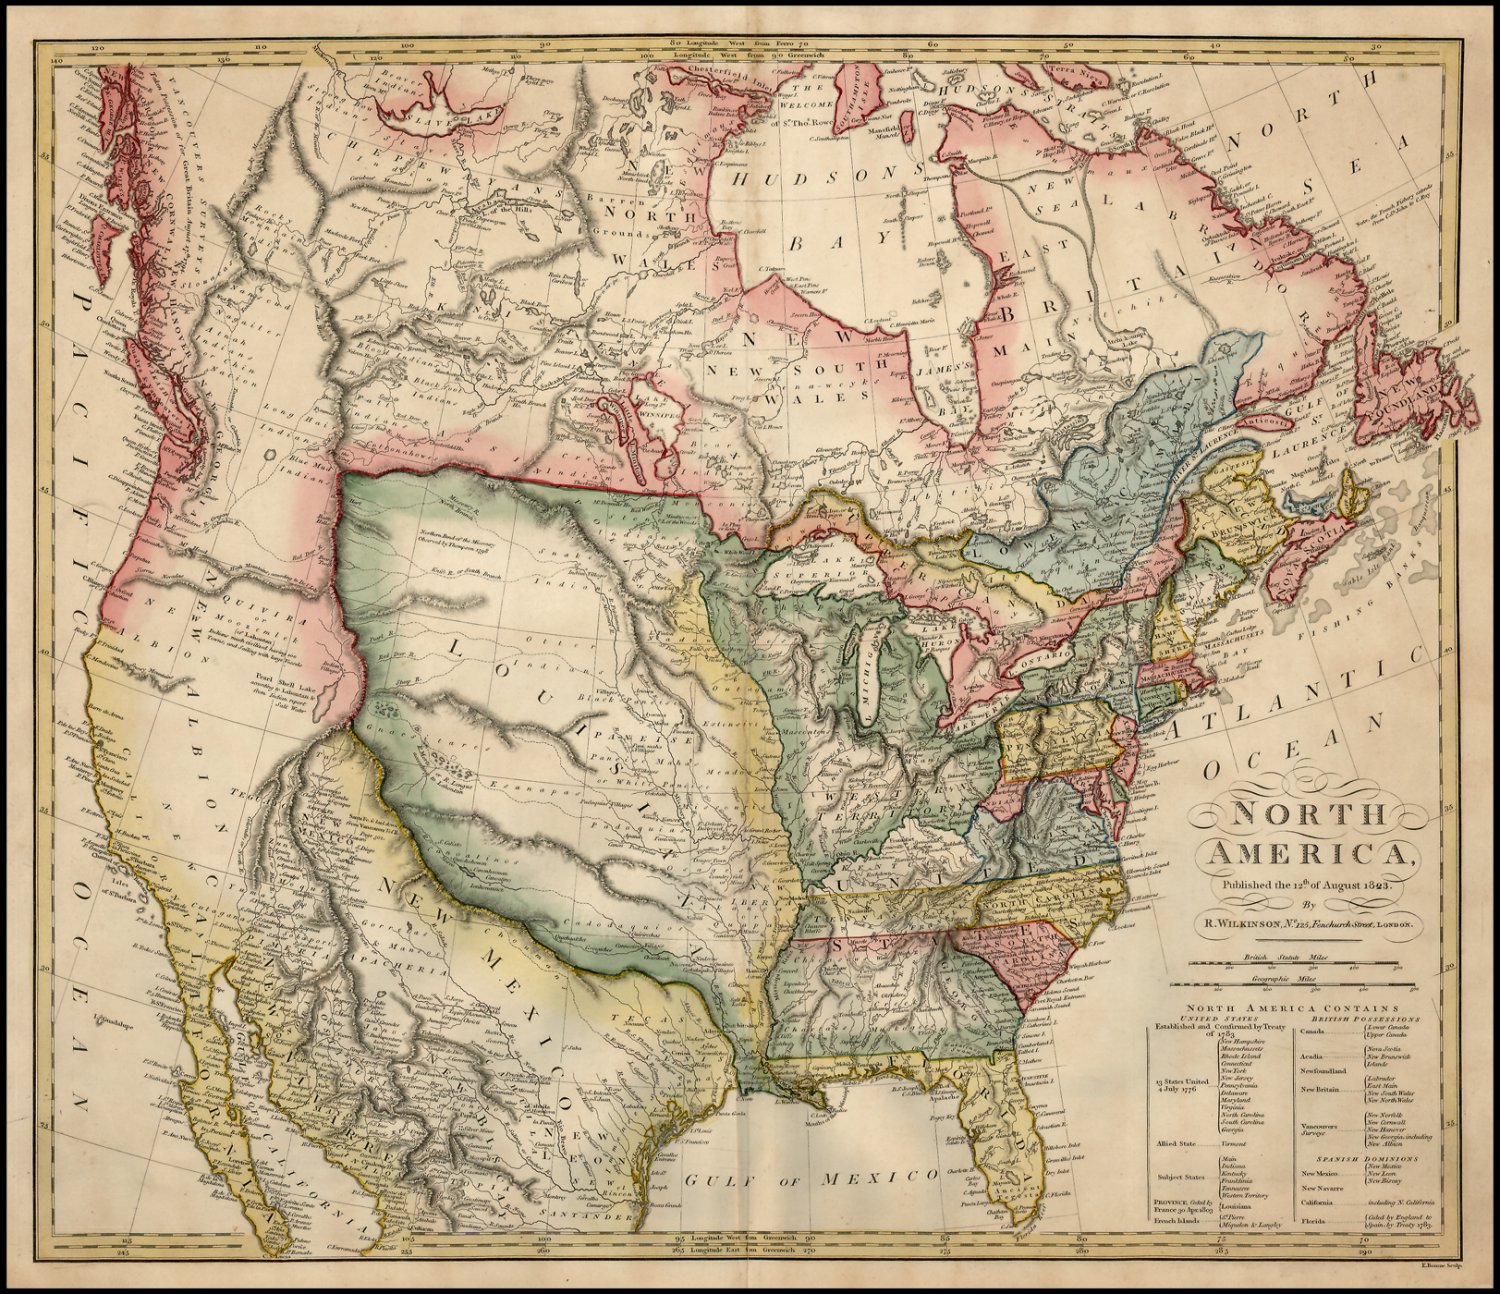 Antique Prints Blog: Shaping the Trans-Mississippi West: 1800-1810